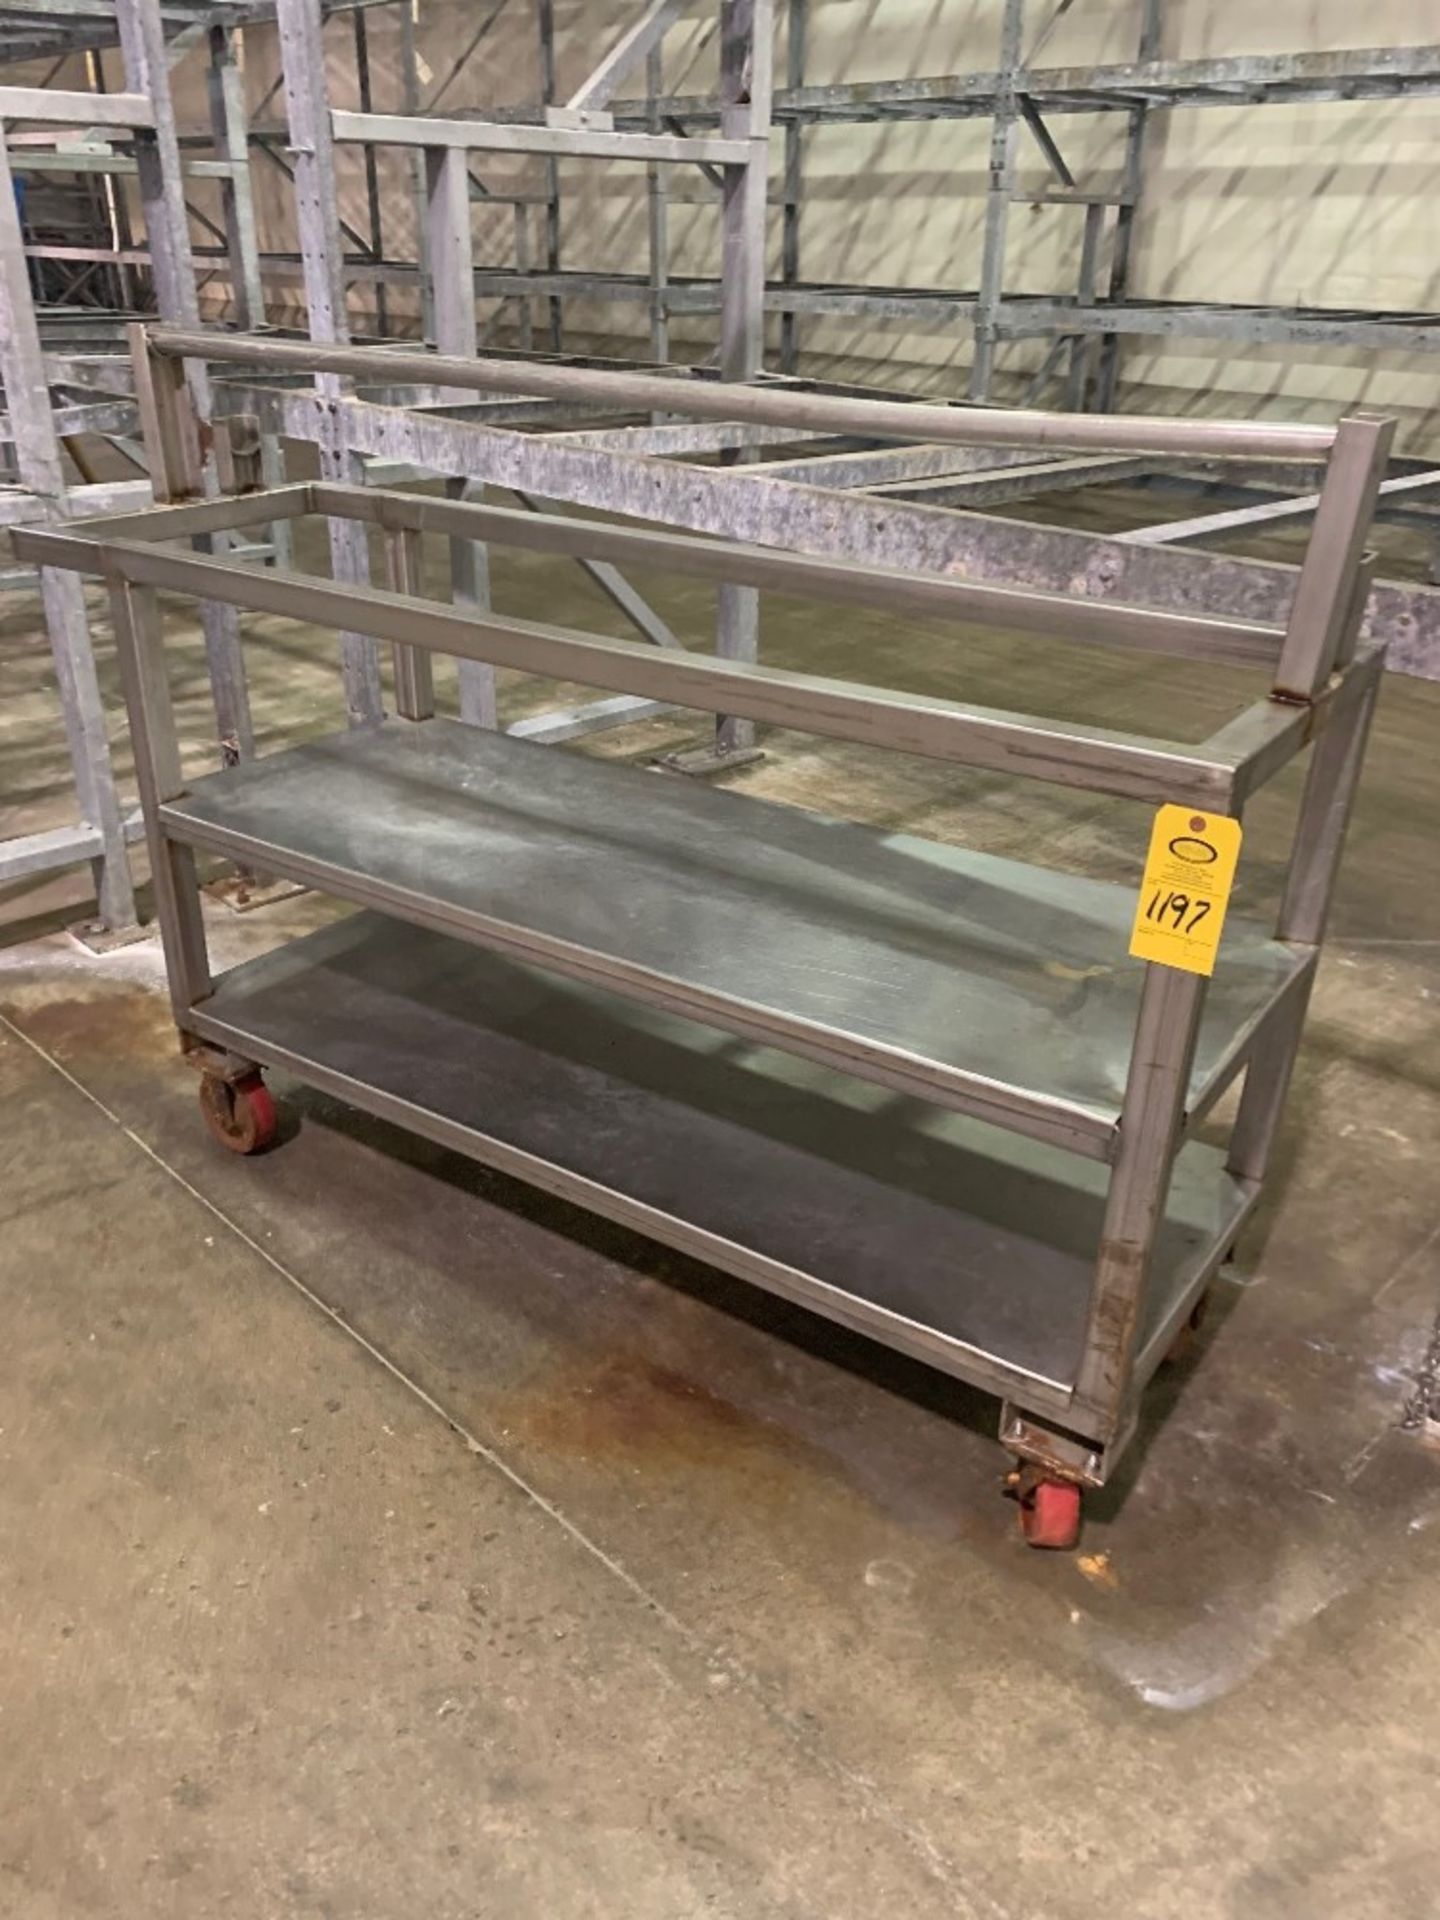 Lot Stainless Steel Parts Cart, (5) Stainless Steel Tables, Stainless Steel Cabinet, 6' Long - Image 9 of 9